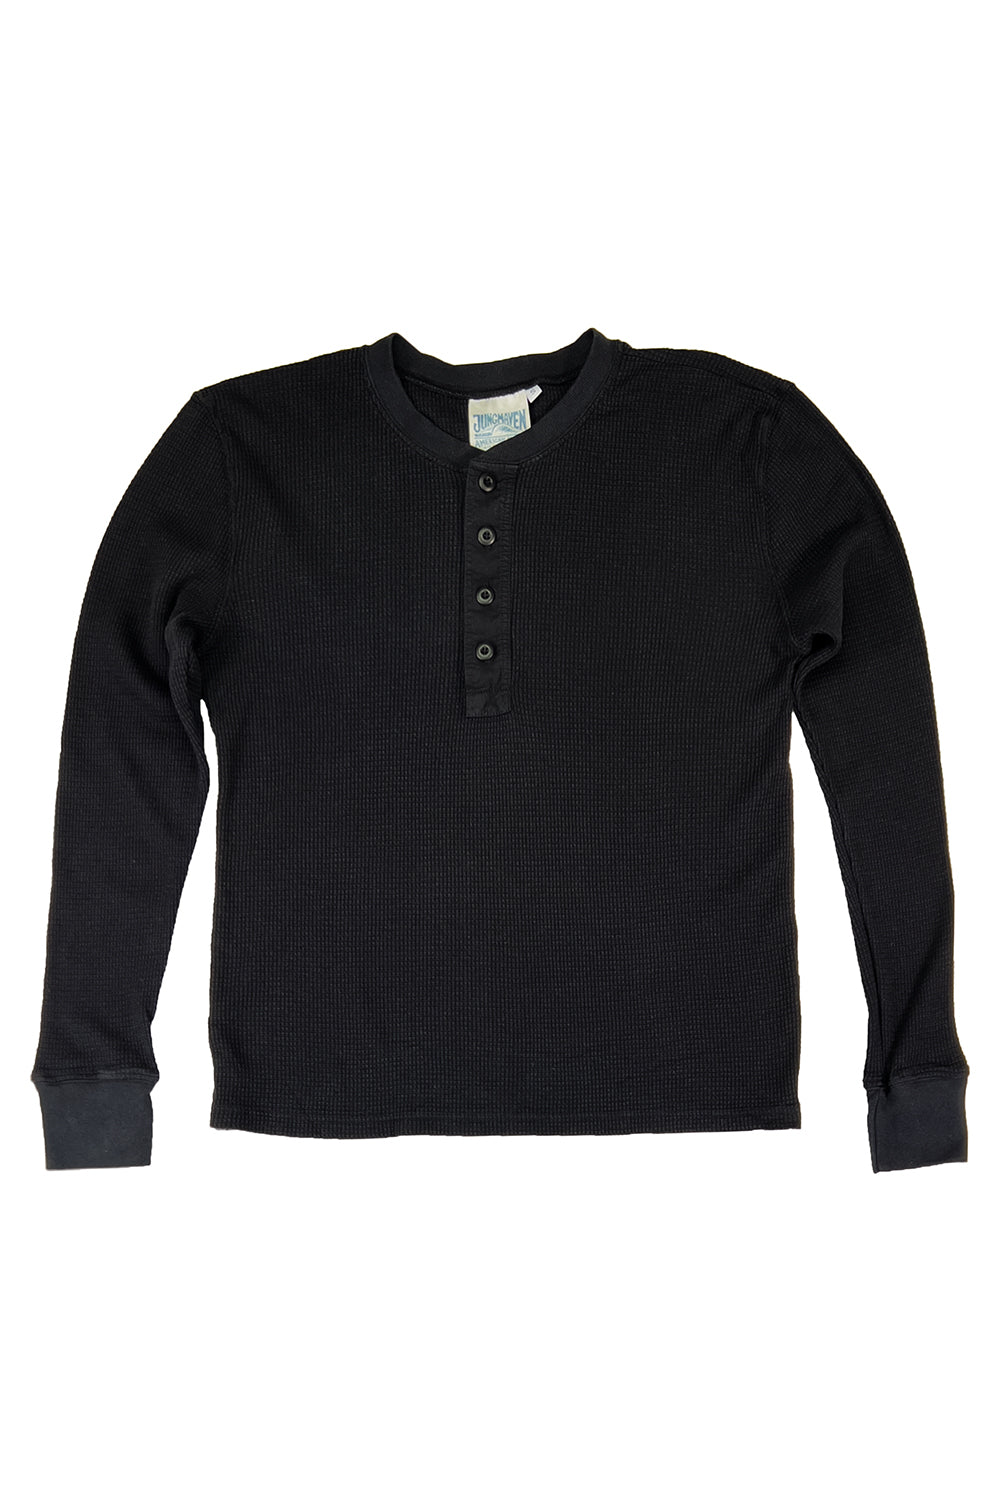 Thermal Mountain Henley | Jungmaven Hemp Clothing & Accessories / Color: Black